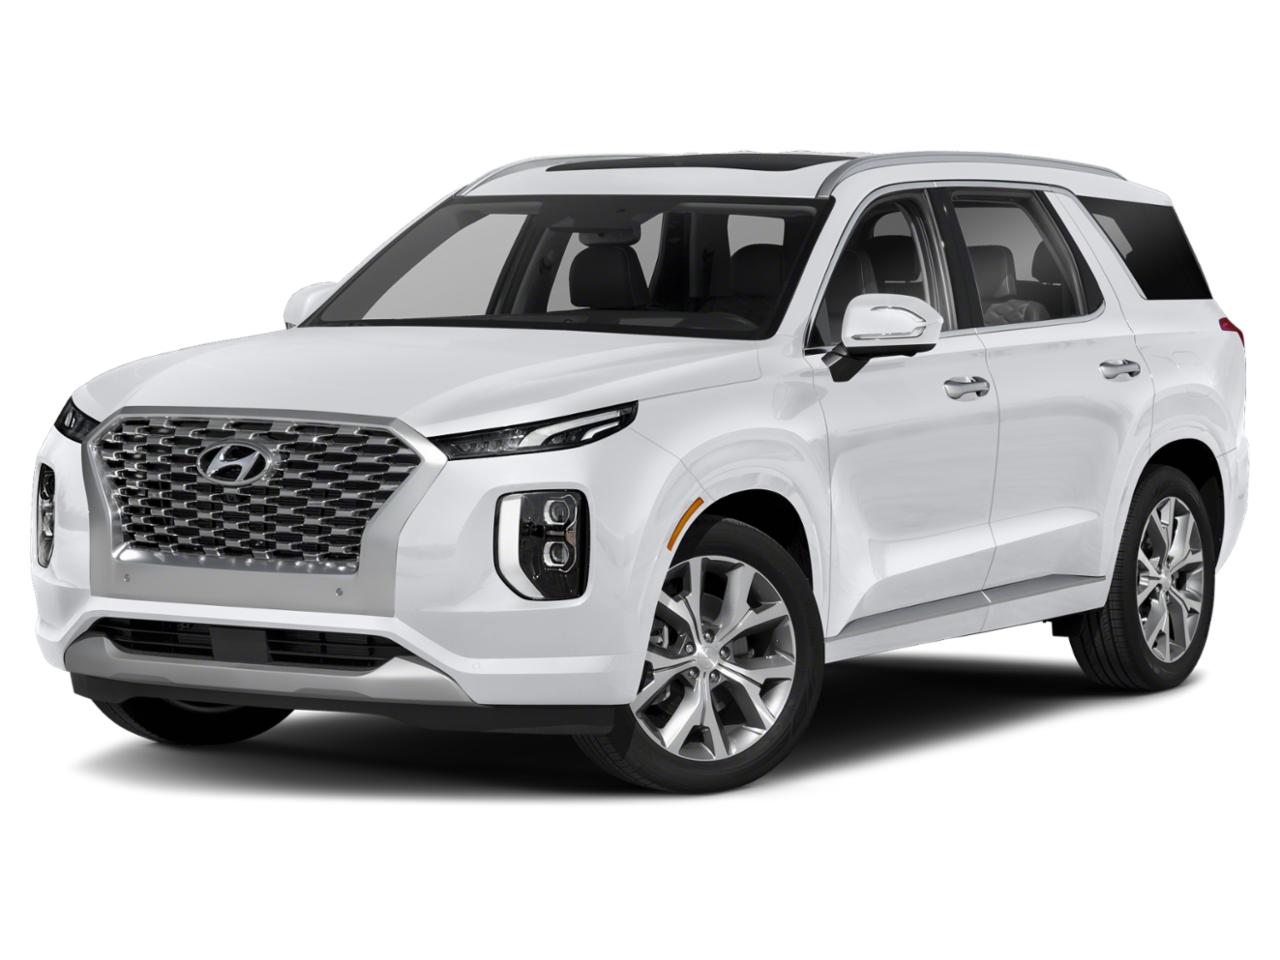 Learn About This Used 2022 White Hyundai Limited FWD PALISADE for Sale